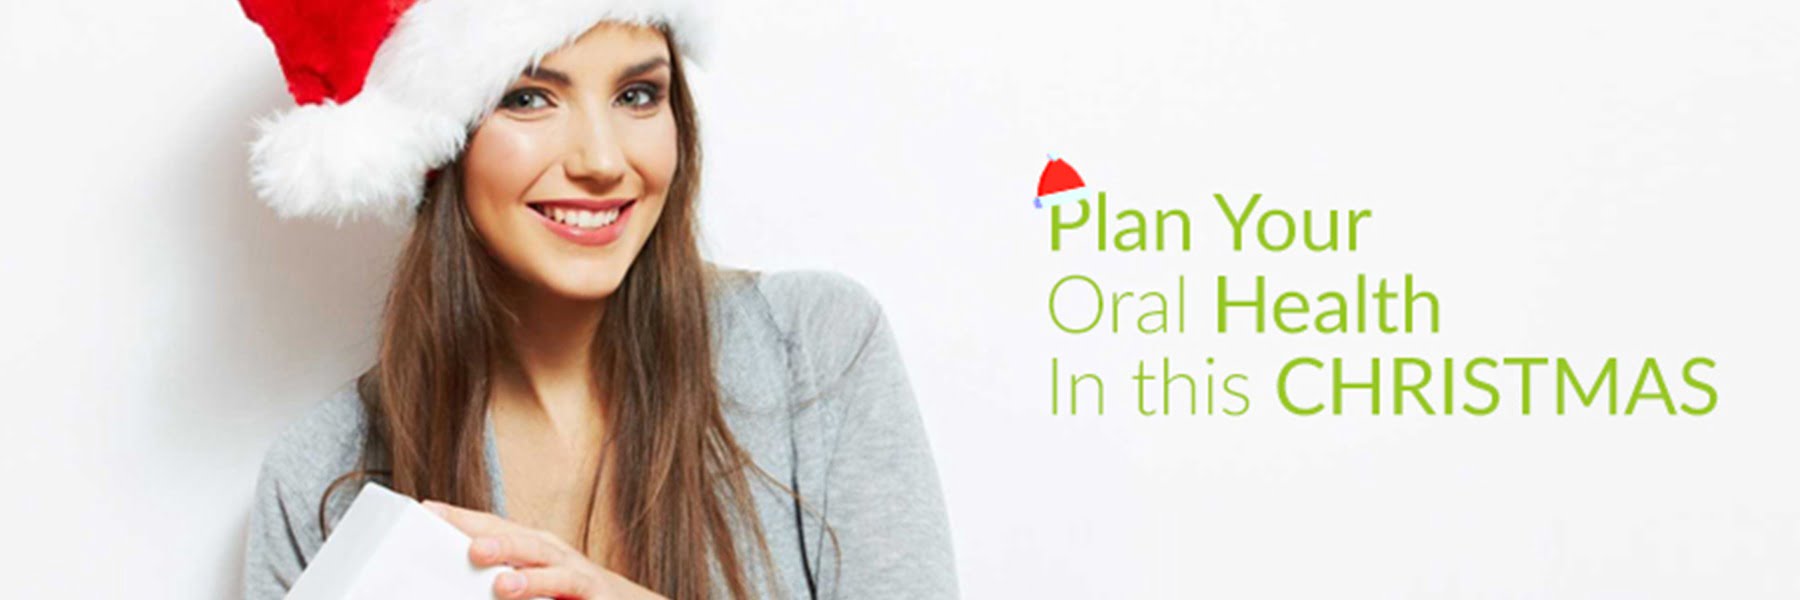 5 Ways To Take Care Of Your Mouth And Teeth This Christmas